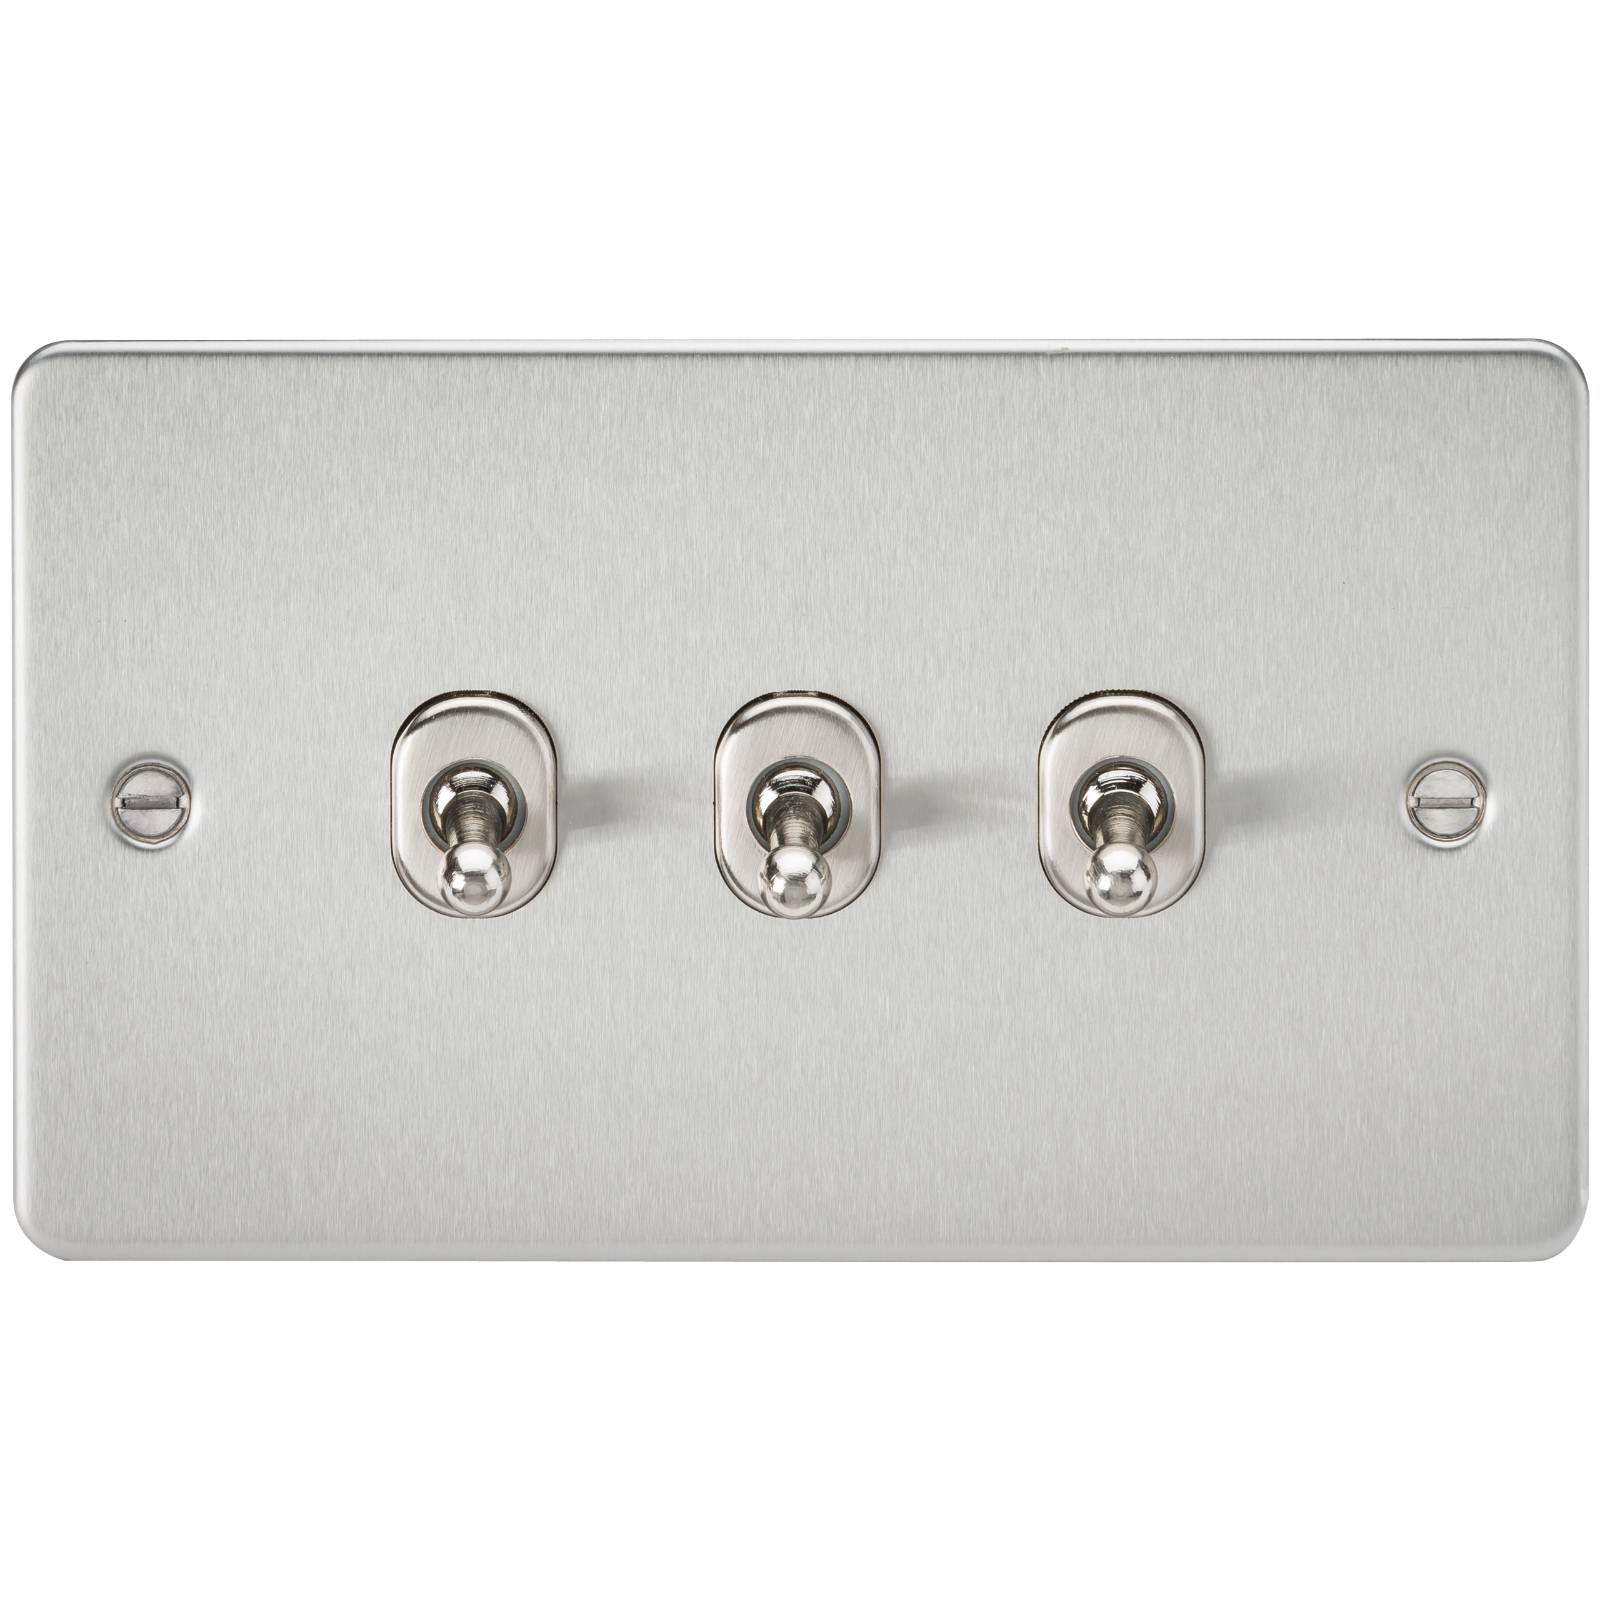 Flat Plate 10A 3G 2-way Toggle Switch - Brushed Chrome - FP3TOGBC 